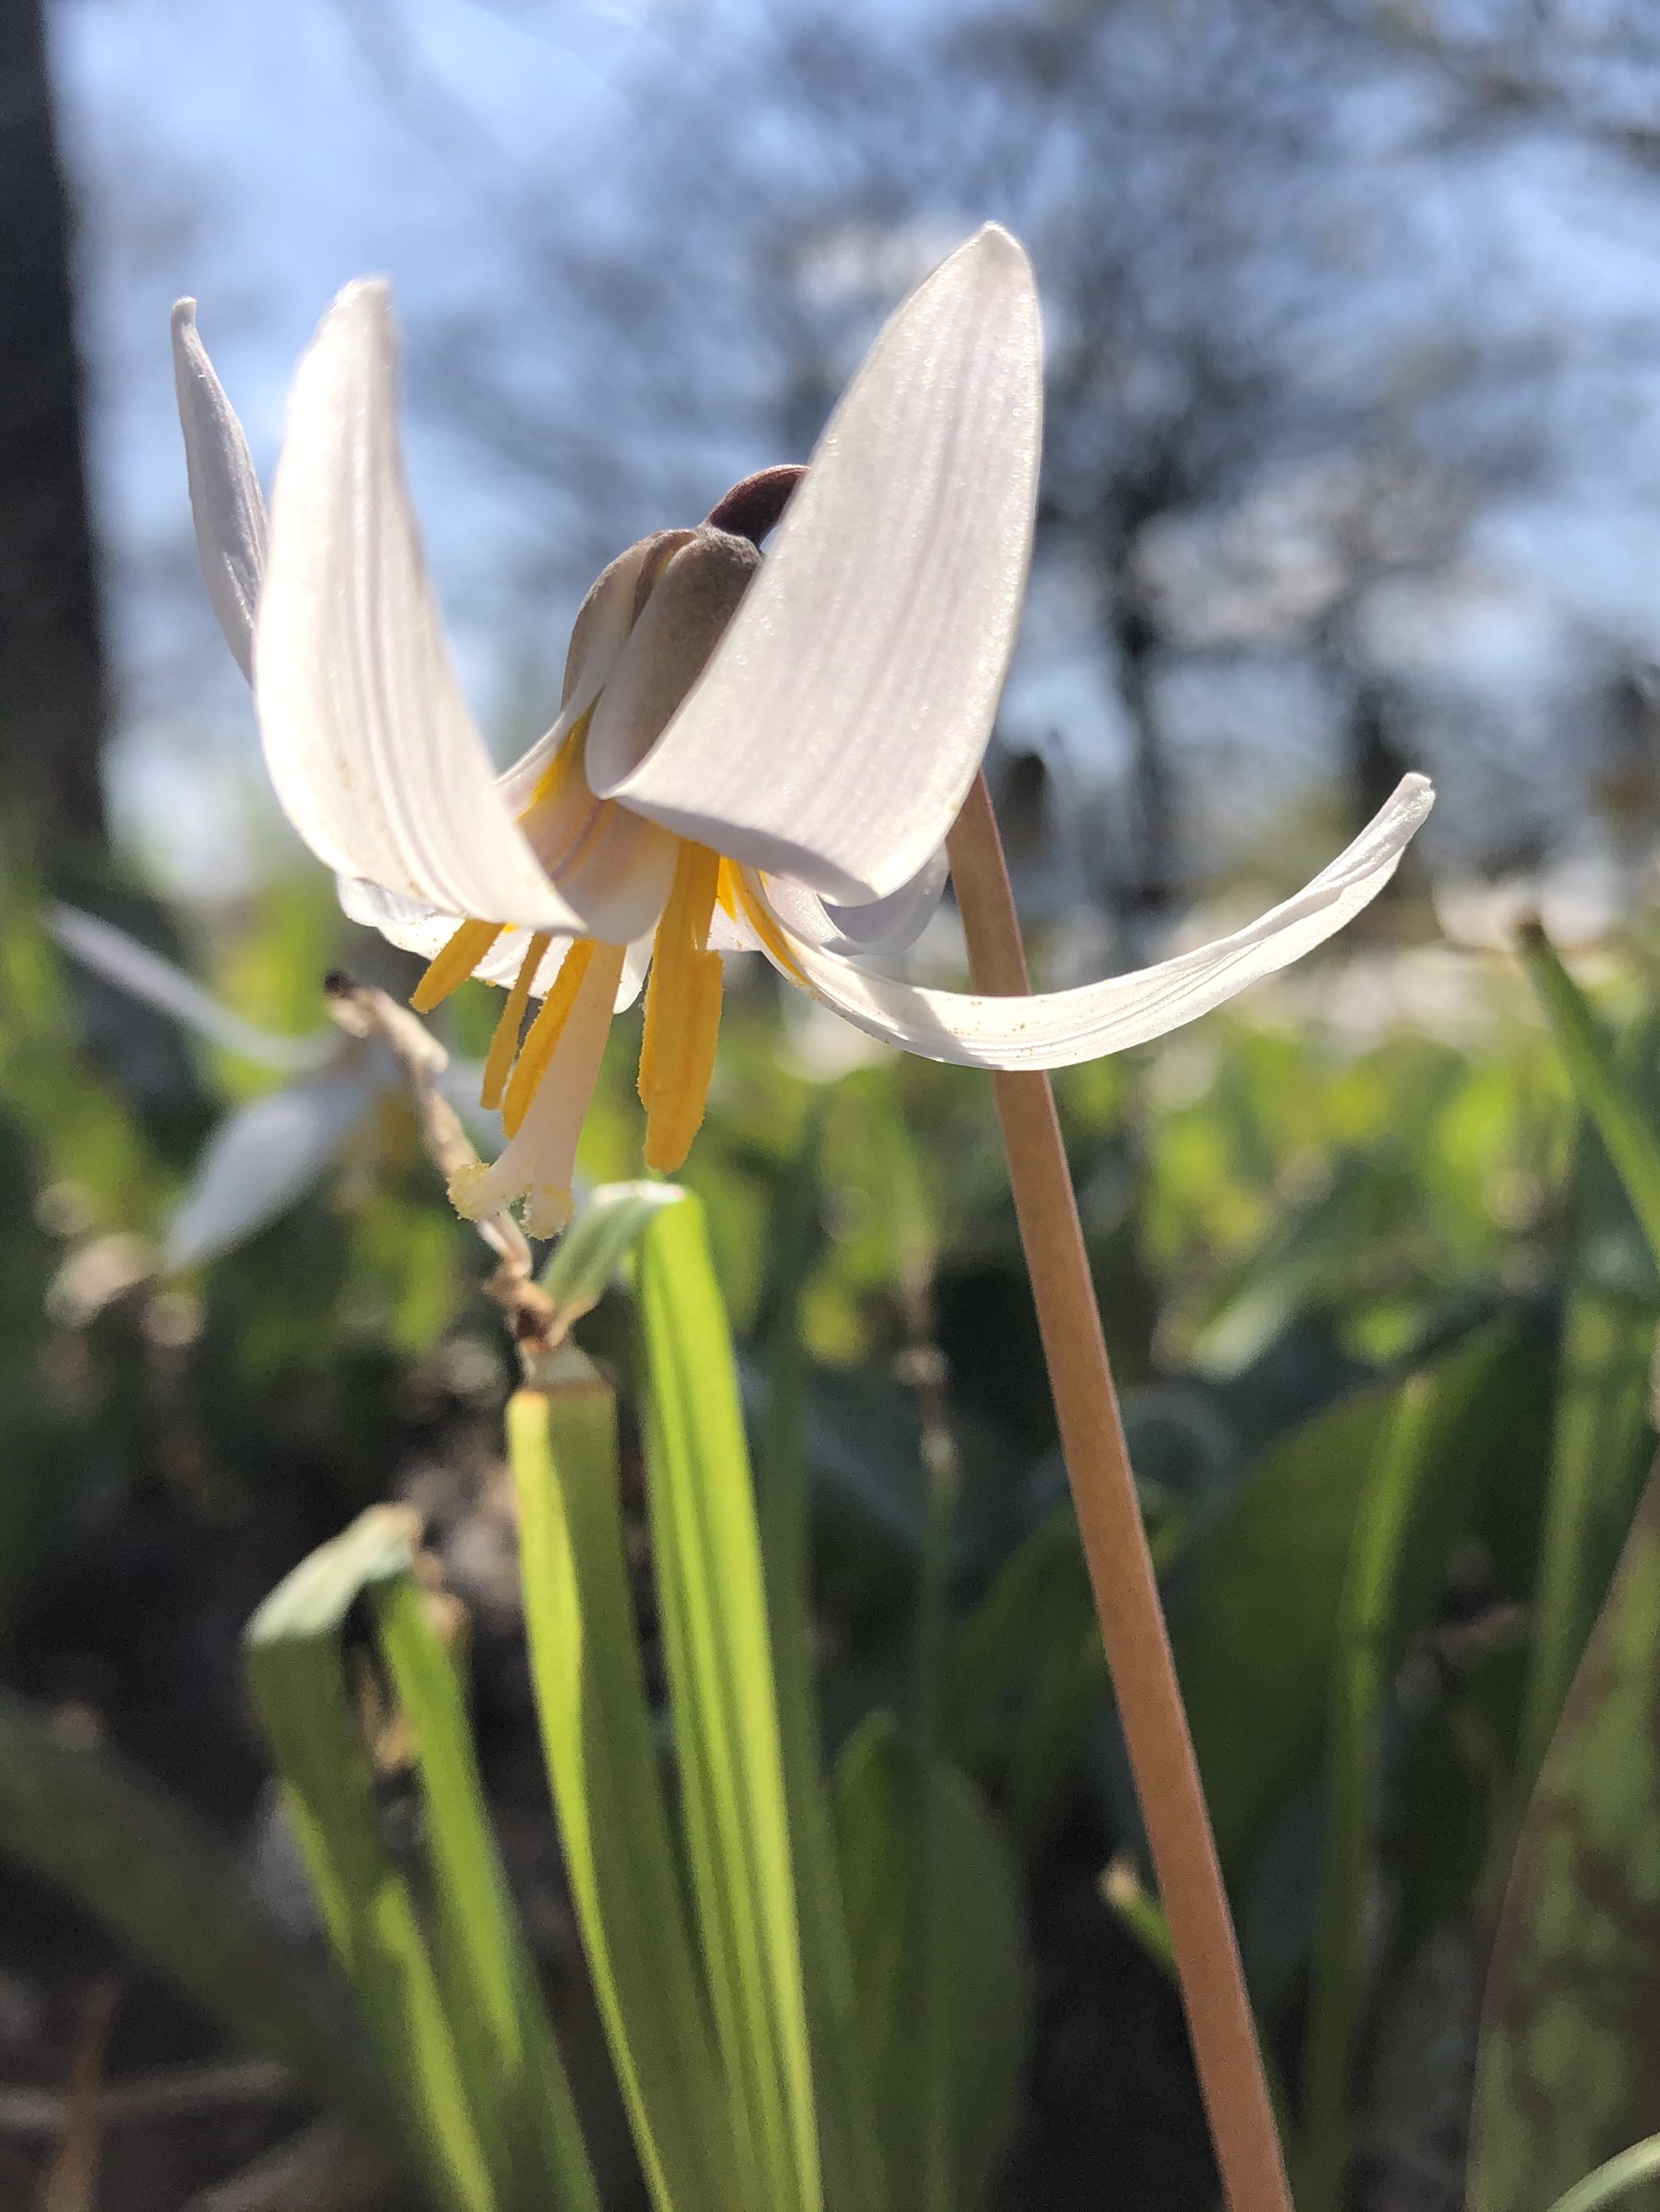 Trout Lily in Oak Savanna near Council Ring in Madison, Wisconsin on April 22, 2021.